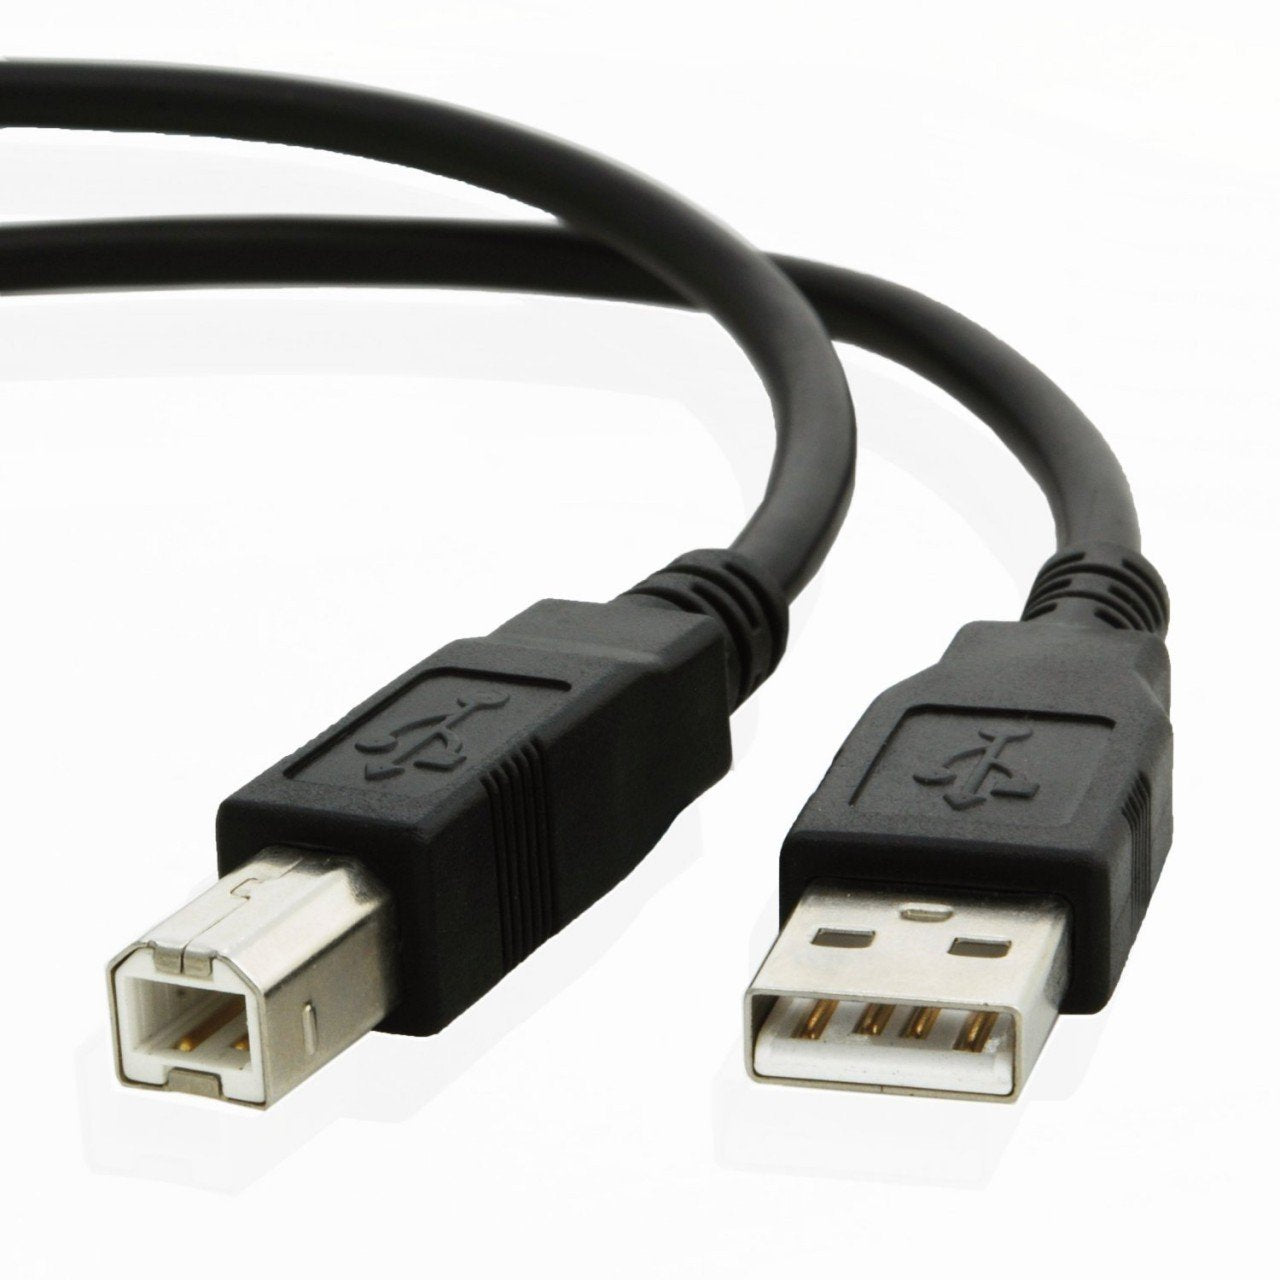 USB cable for Brother MFC-J470DW